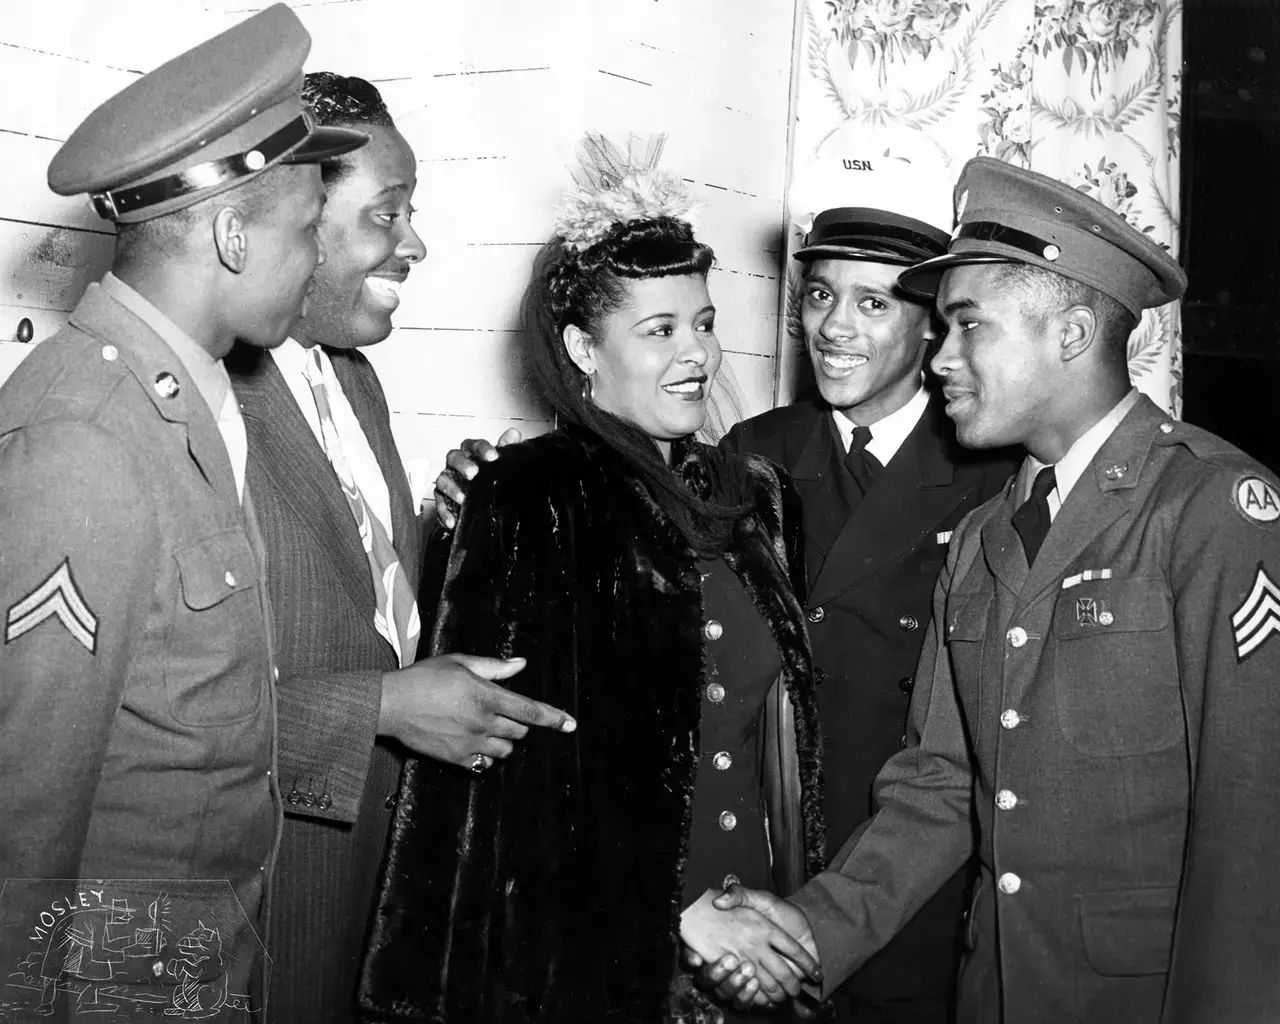 Billie Holiday meets a sergeant and other soldiers at the South Broad Street USO, 1943. Photo by John W. Mosley.